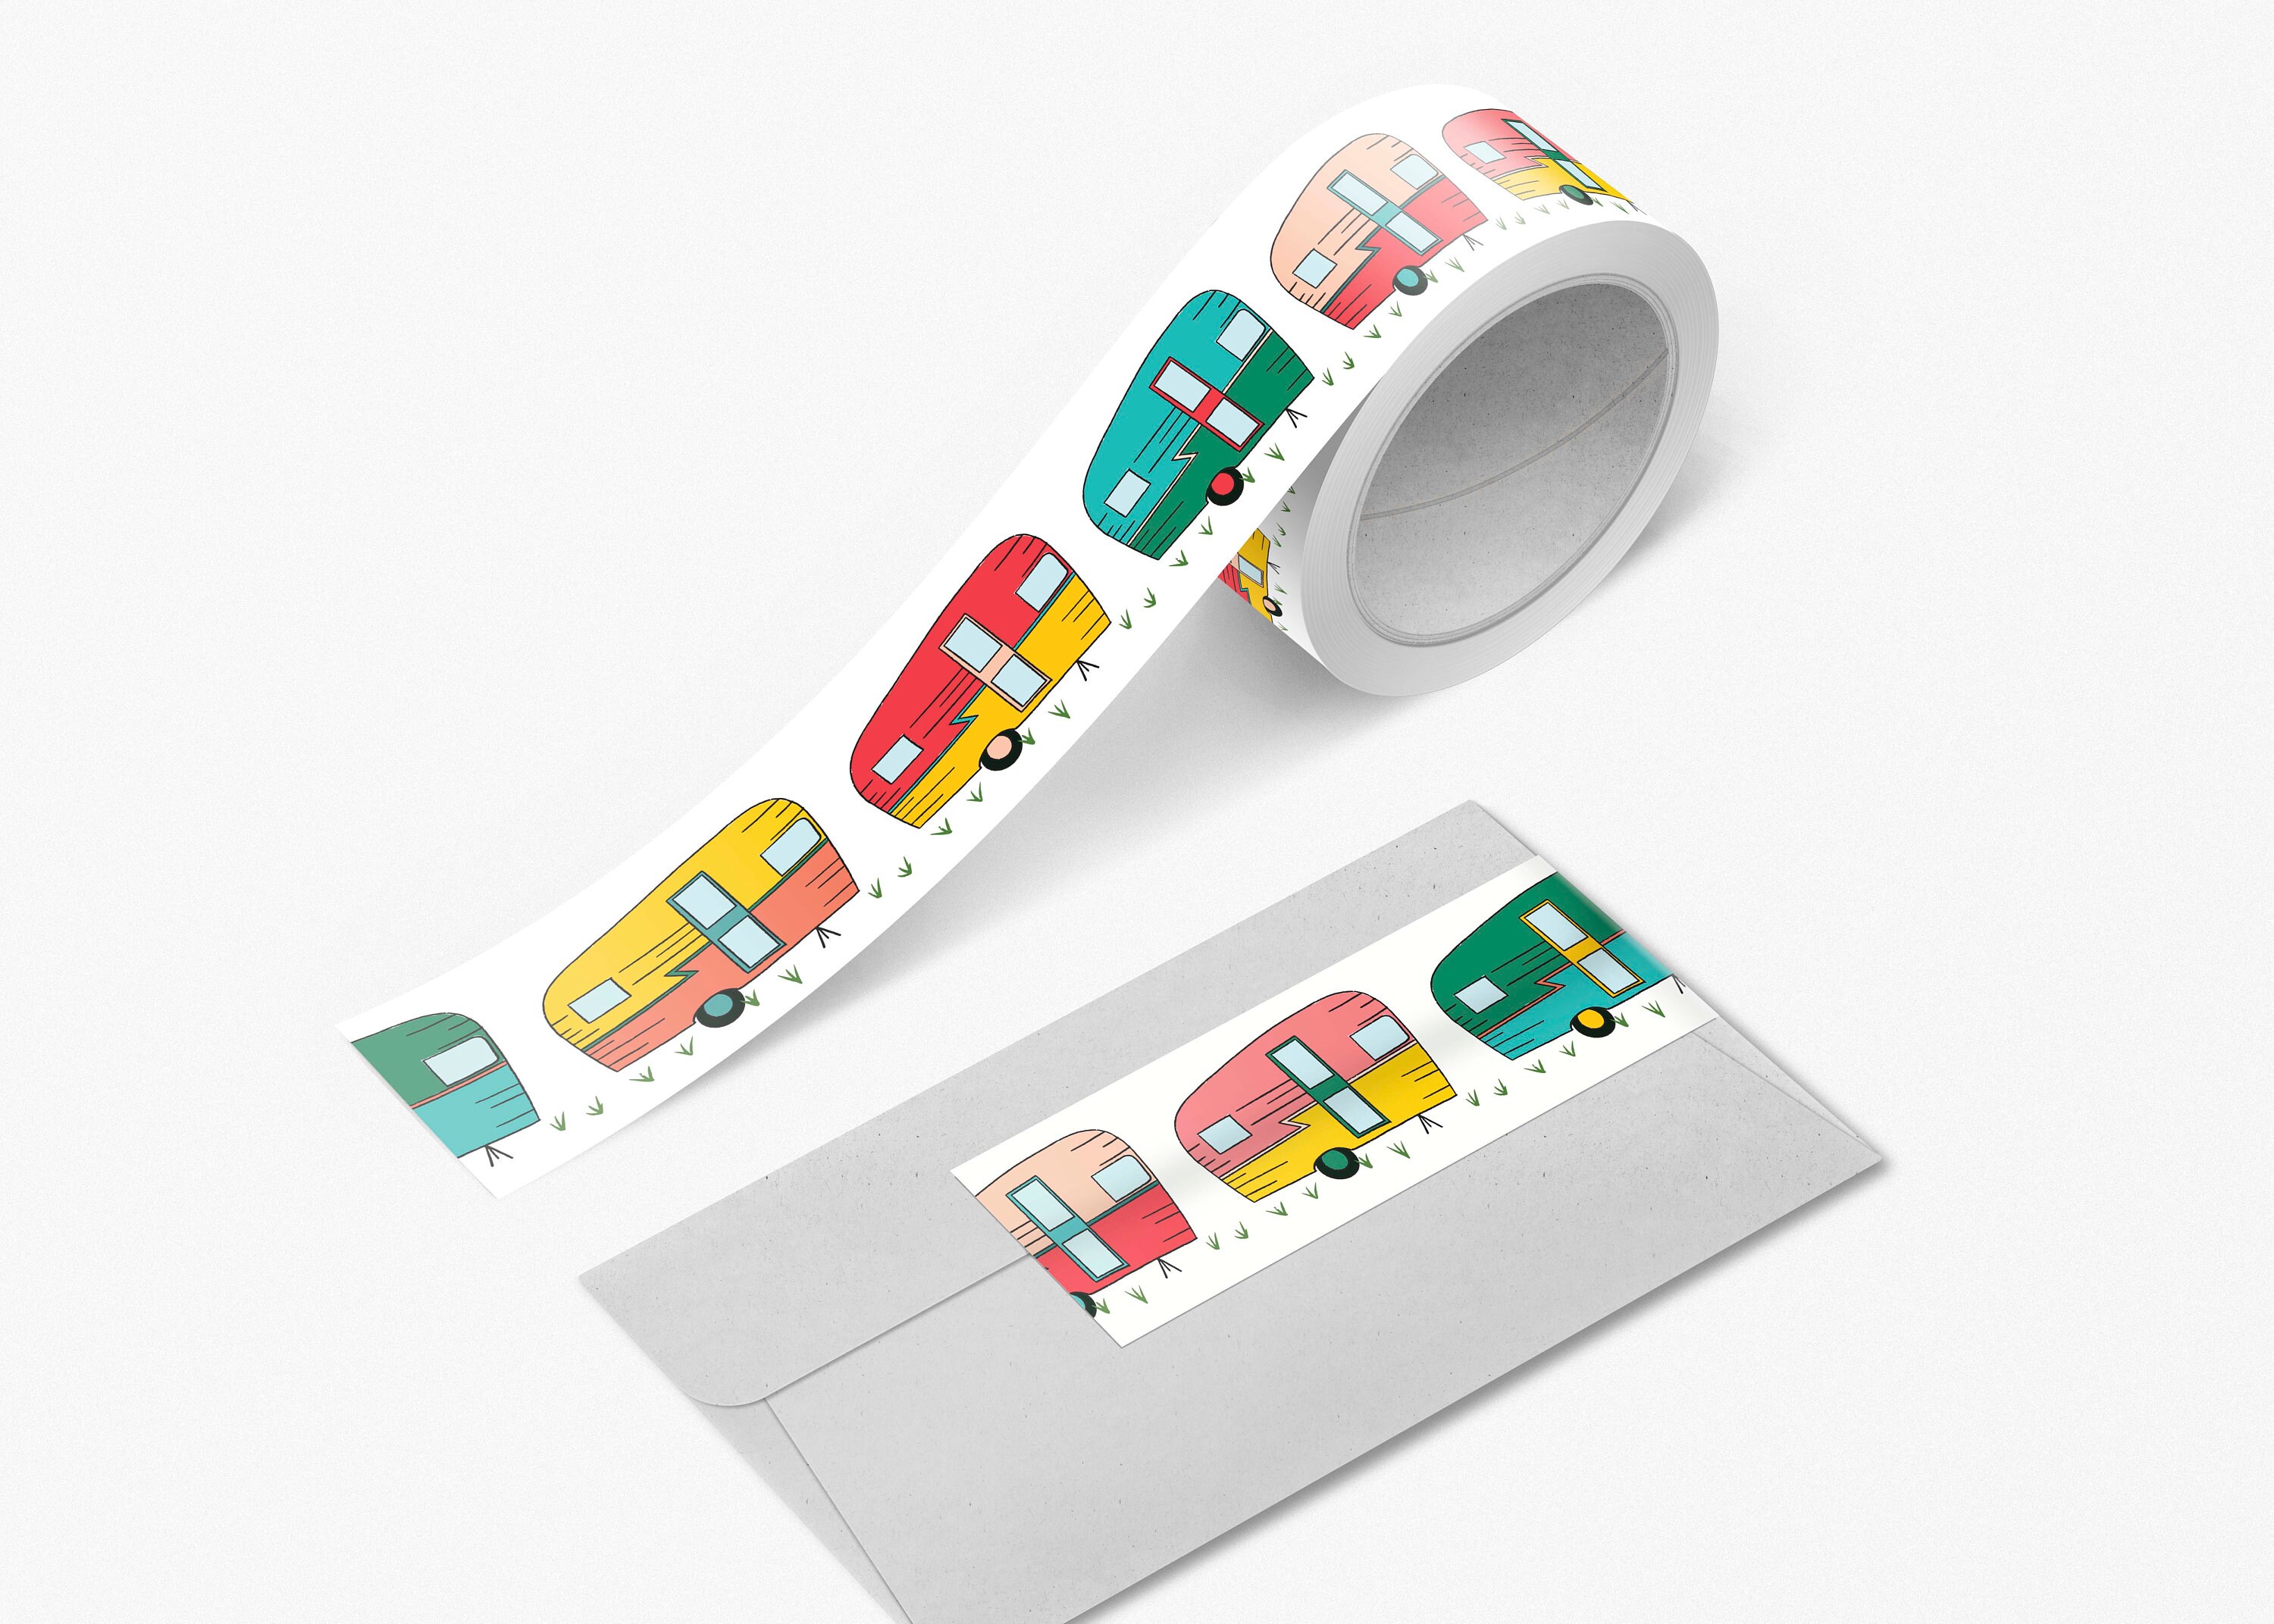 Toyvian Road Race Track Sticker Roll for Toy Car Trains Toy Tape Stickers  Railway Road Tape